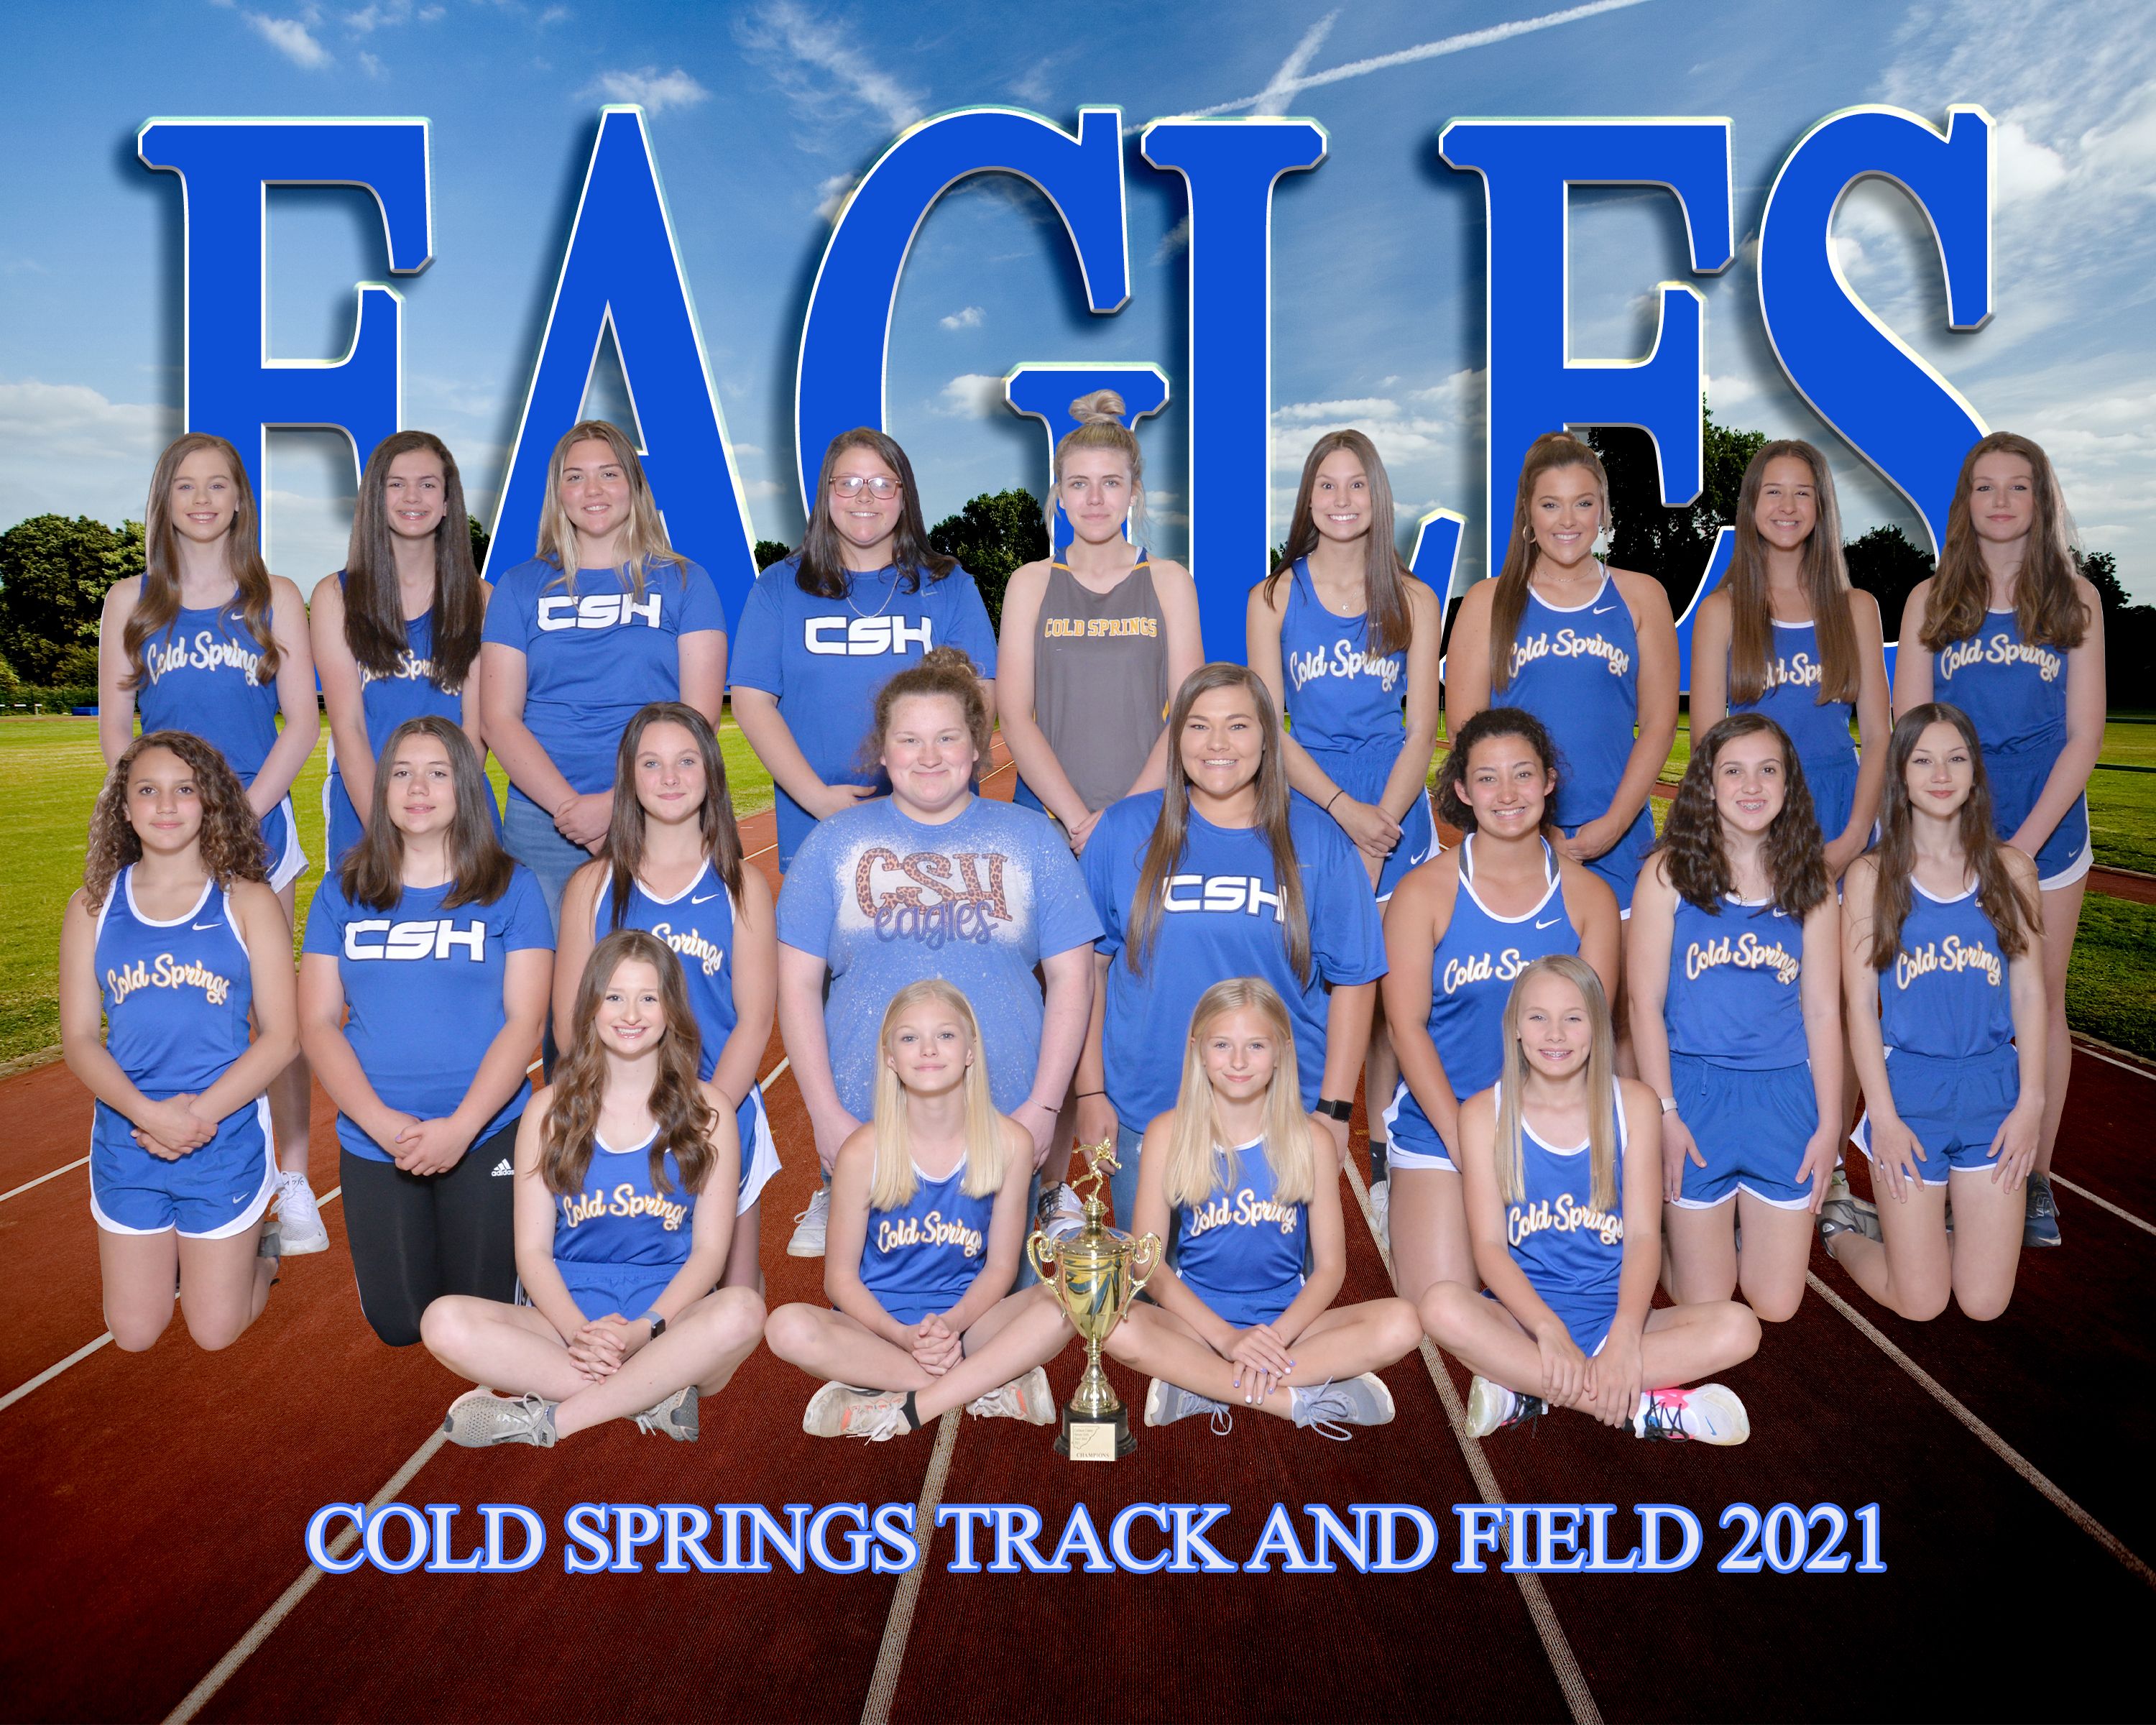 2021 Cold Springs Girls Track & Field Team